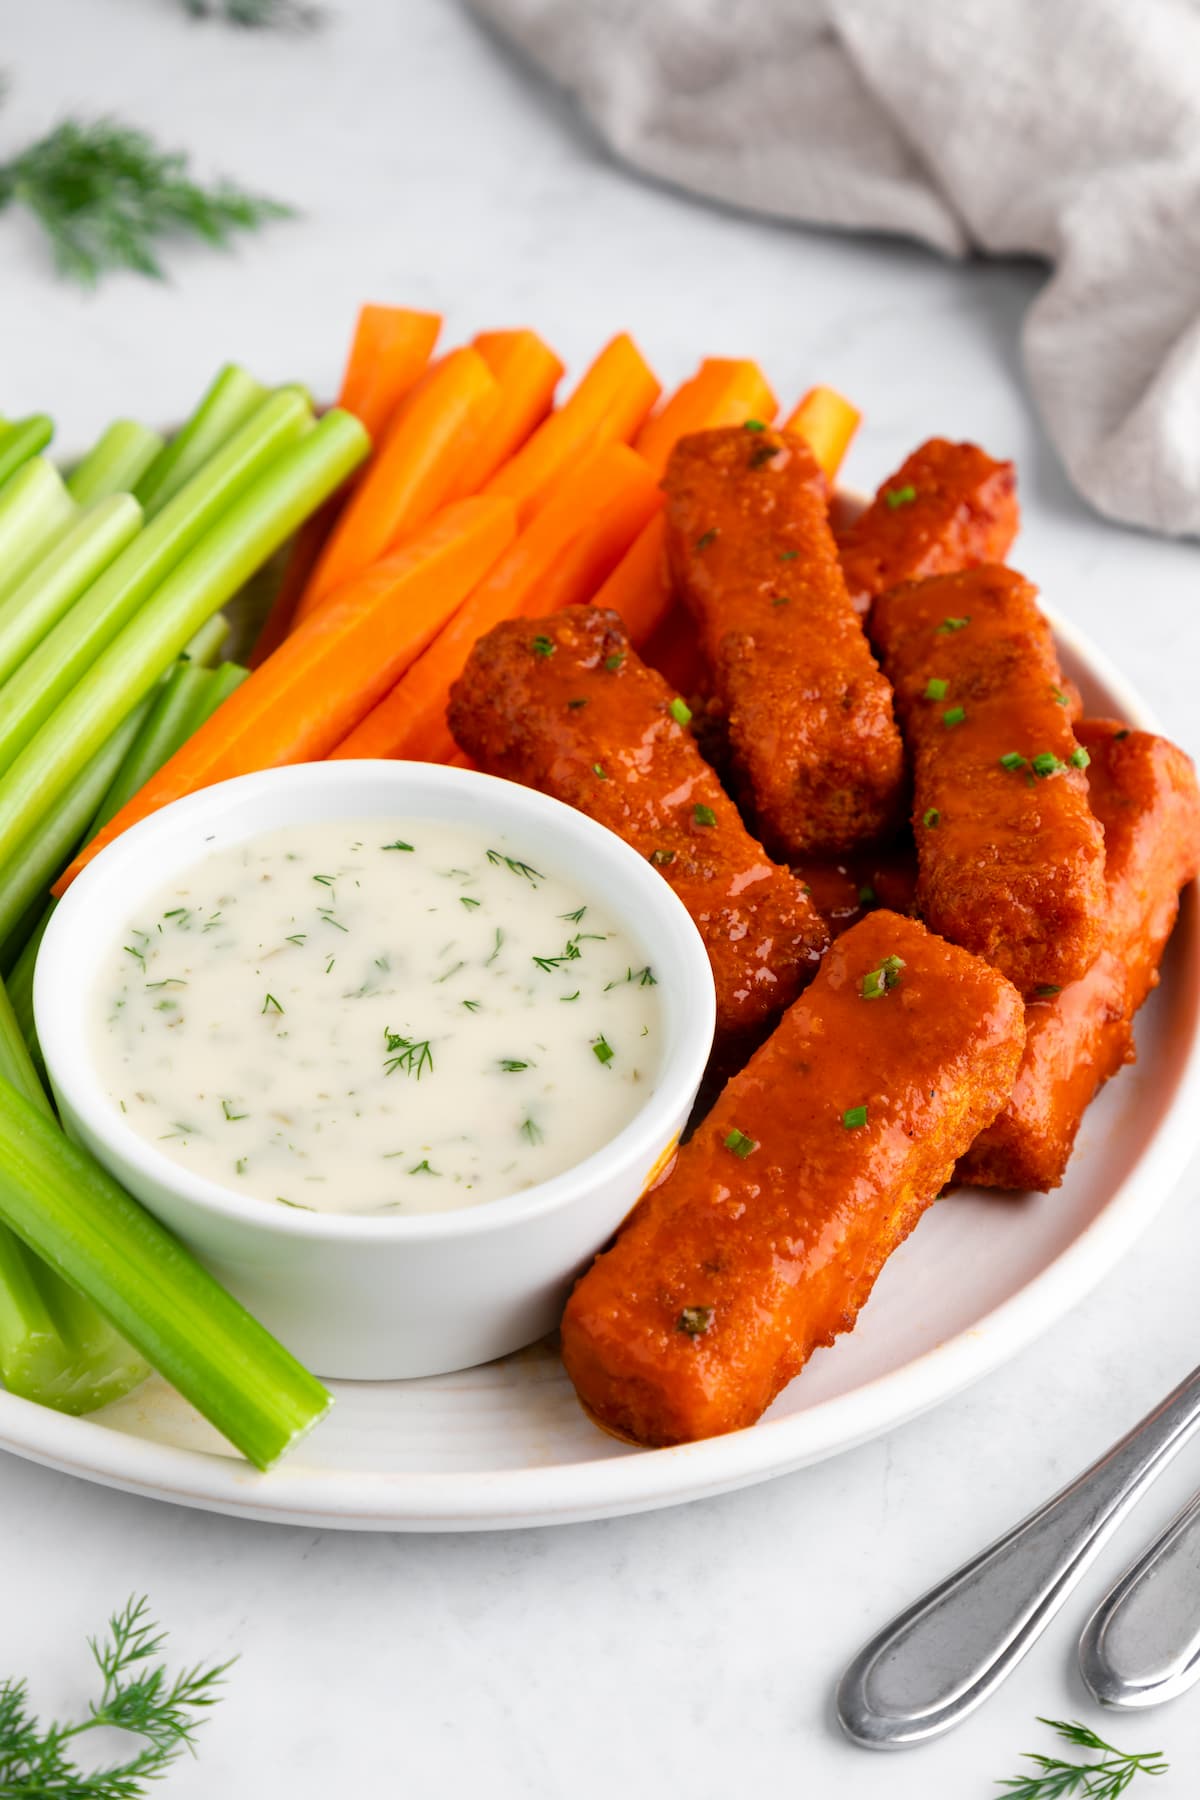 Vegan buffalo wings on a plate with vegan ranch and veggie sticks.